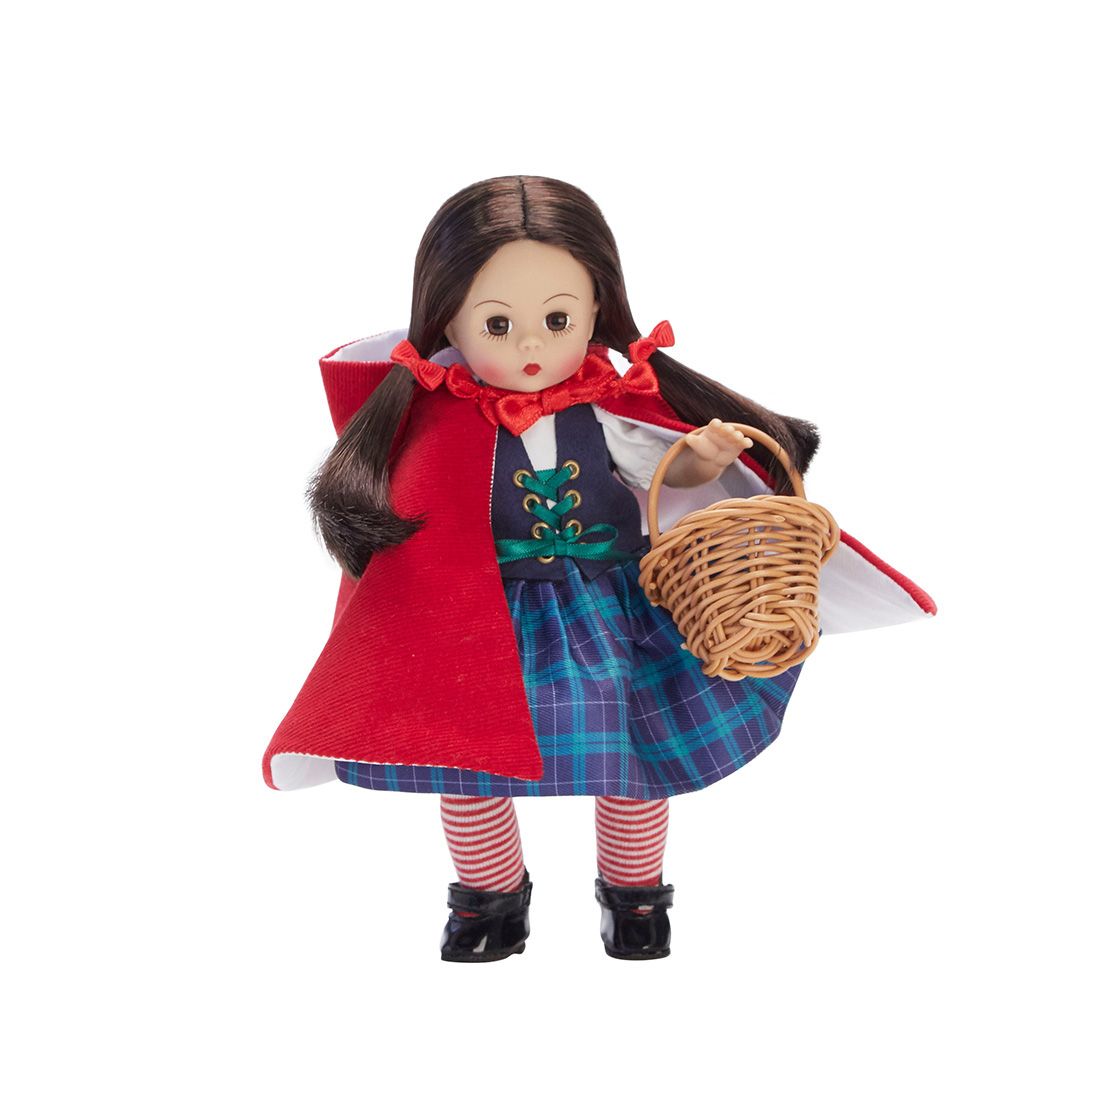 Madame Alexander Red Riding Hood Collectible Doll